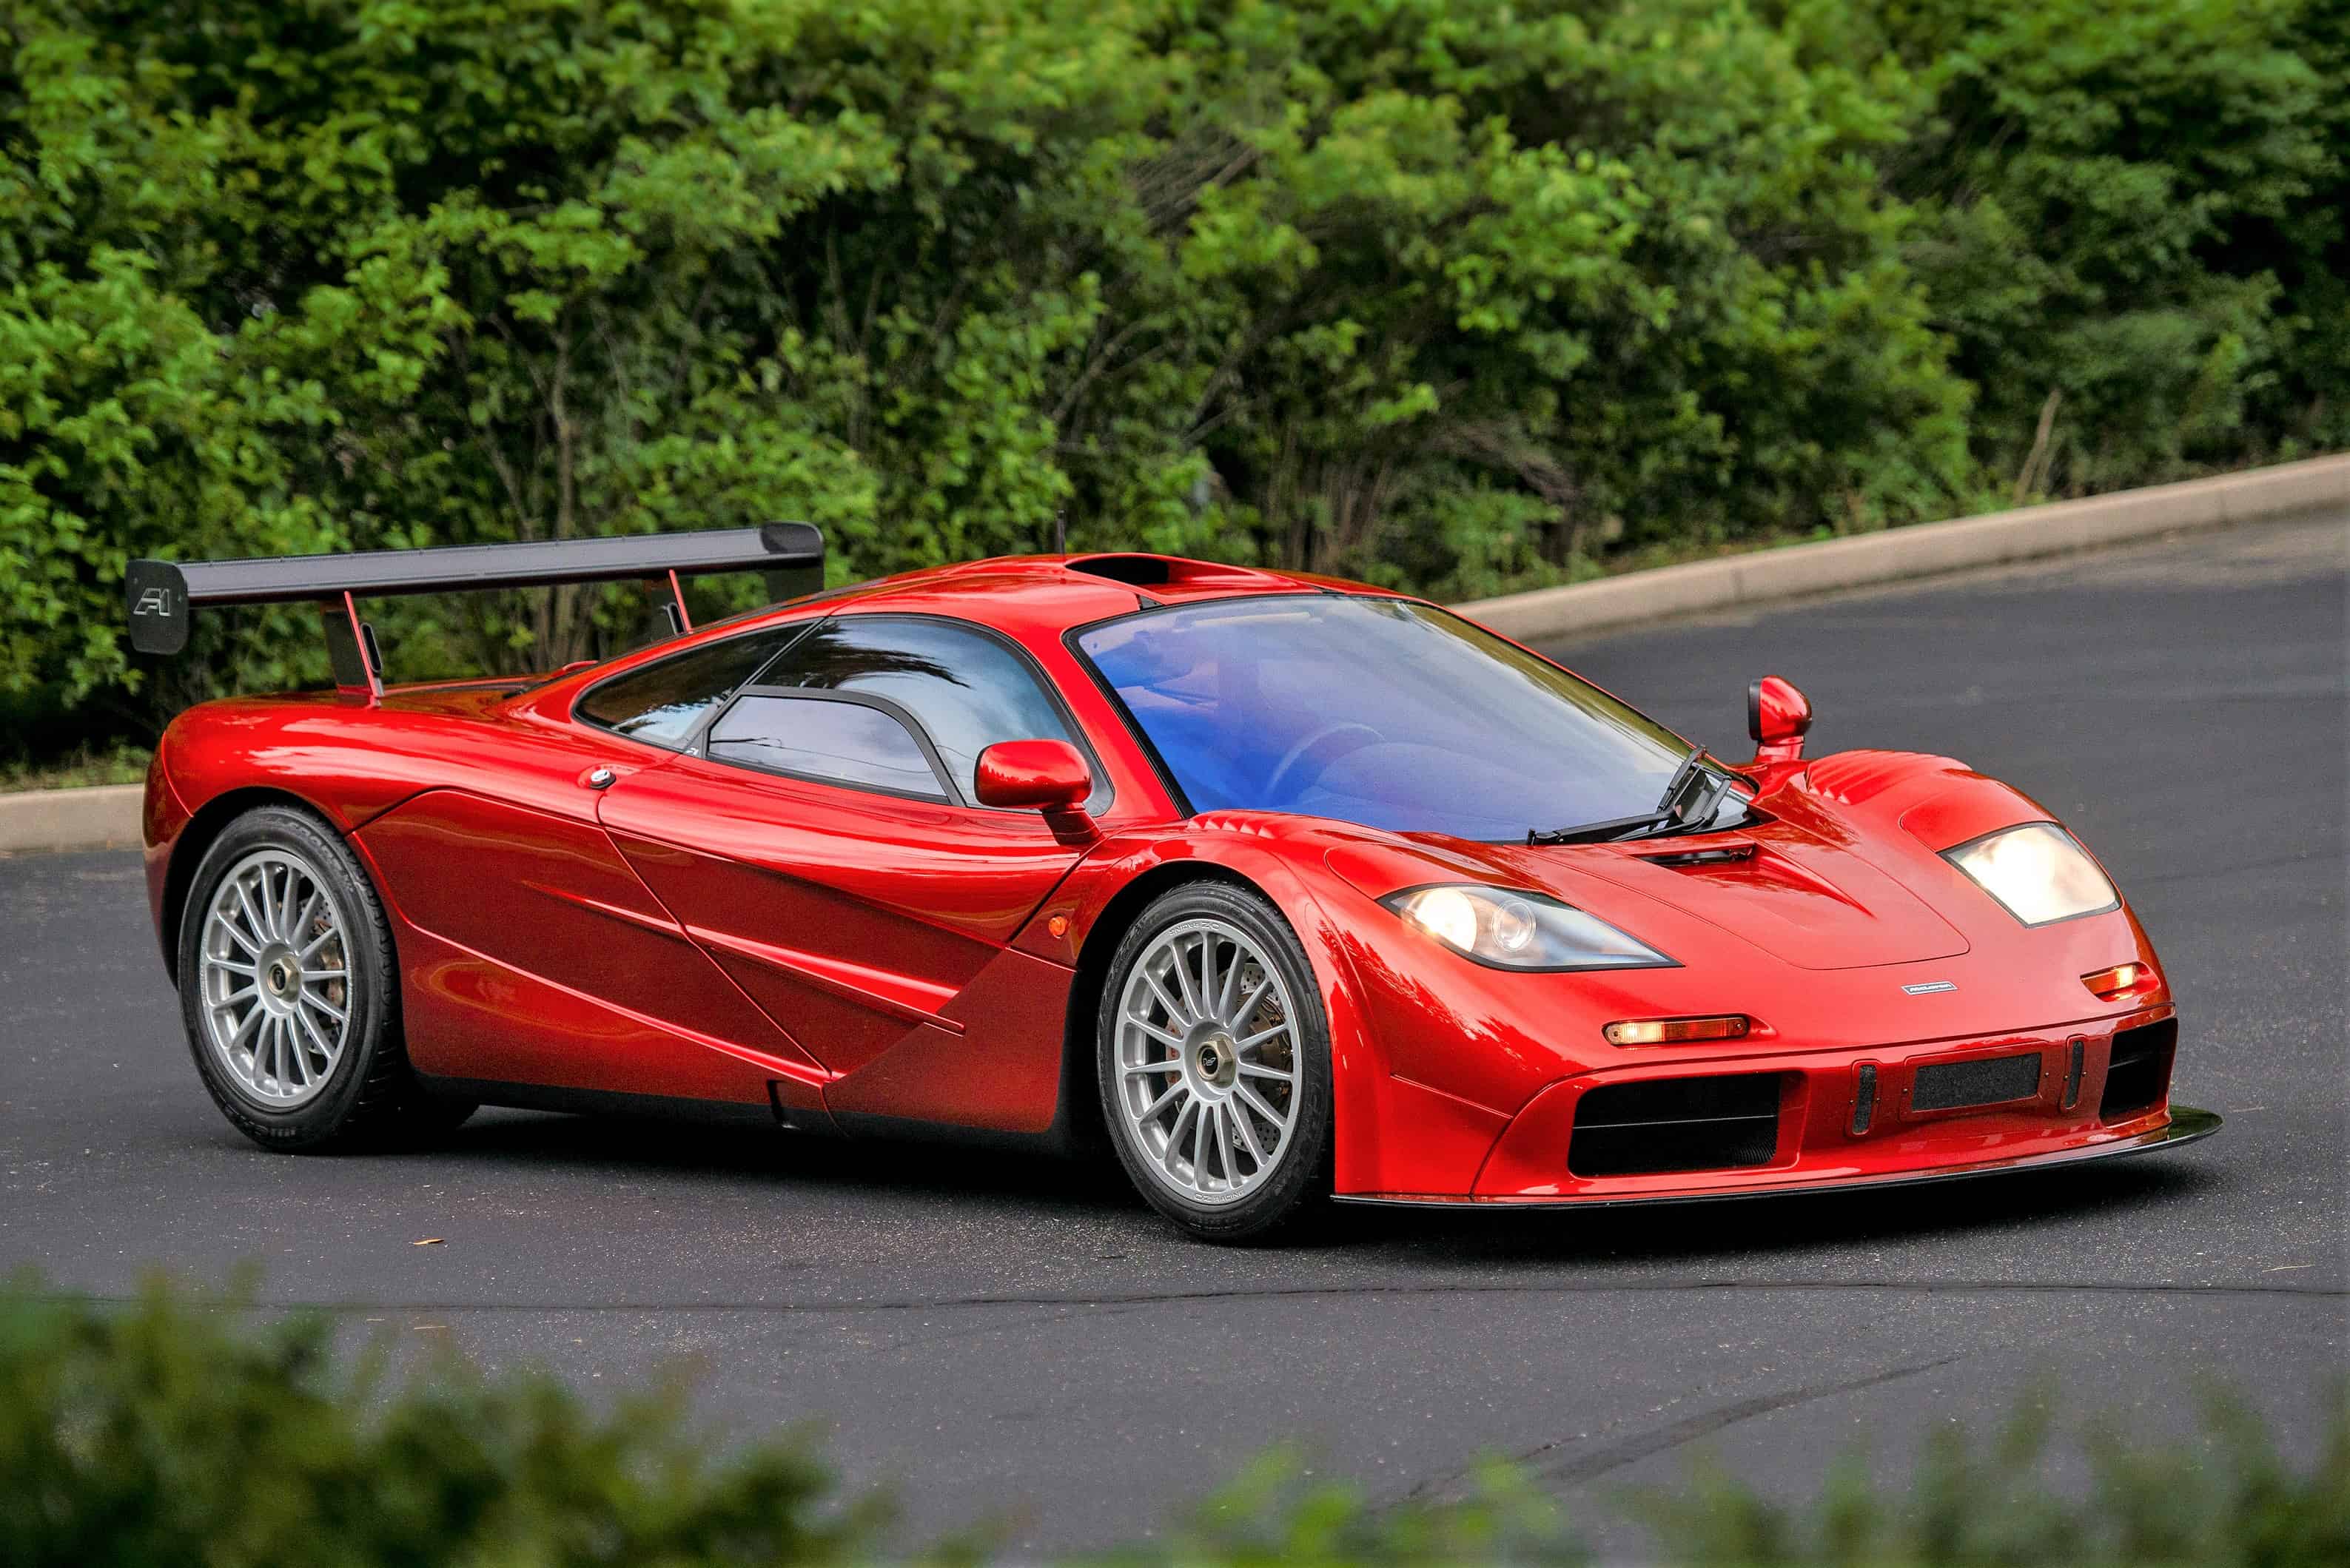 This 1998 McLaren F1 LM Specification is the first Private Sales offering | RM Sotheby's photos